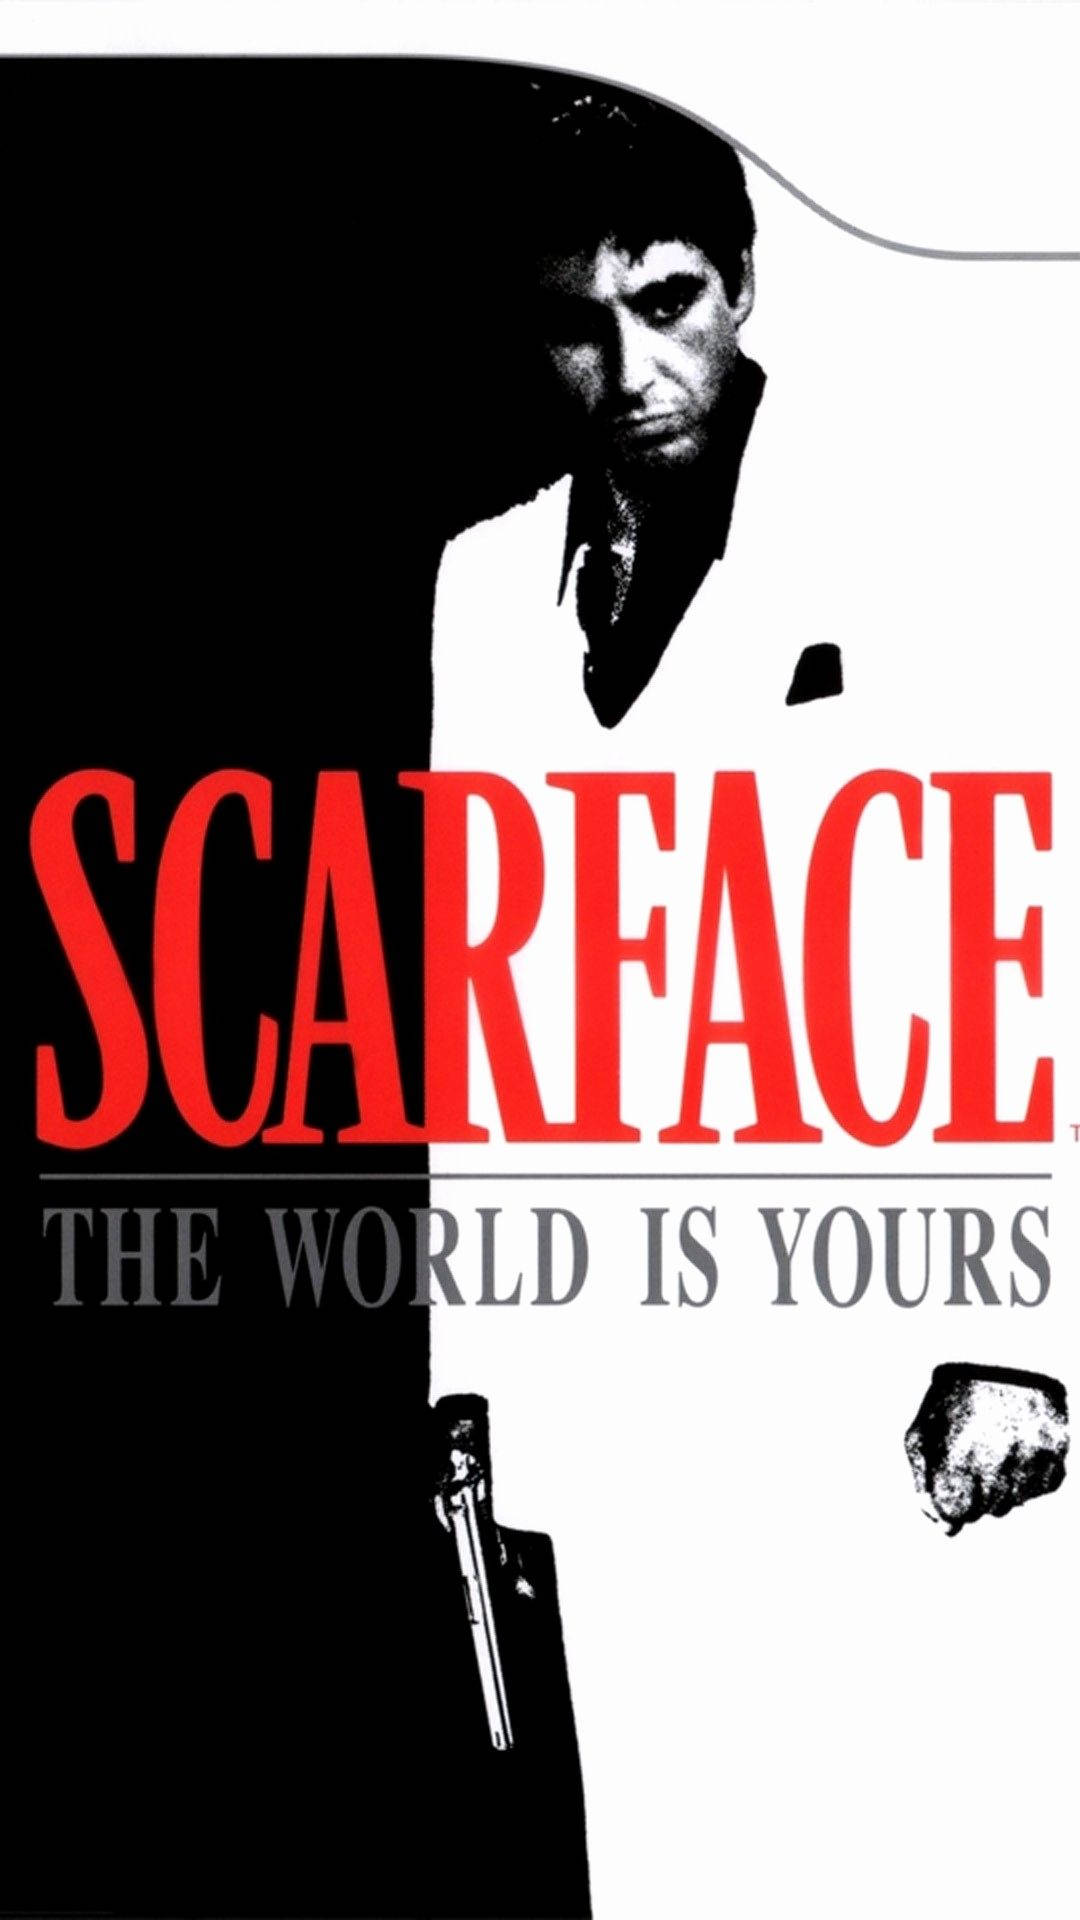 ScarfaceThe World is Yours für PS3. Wallpaper